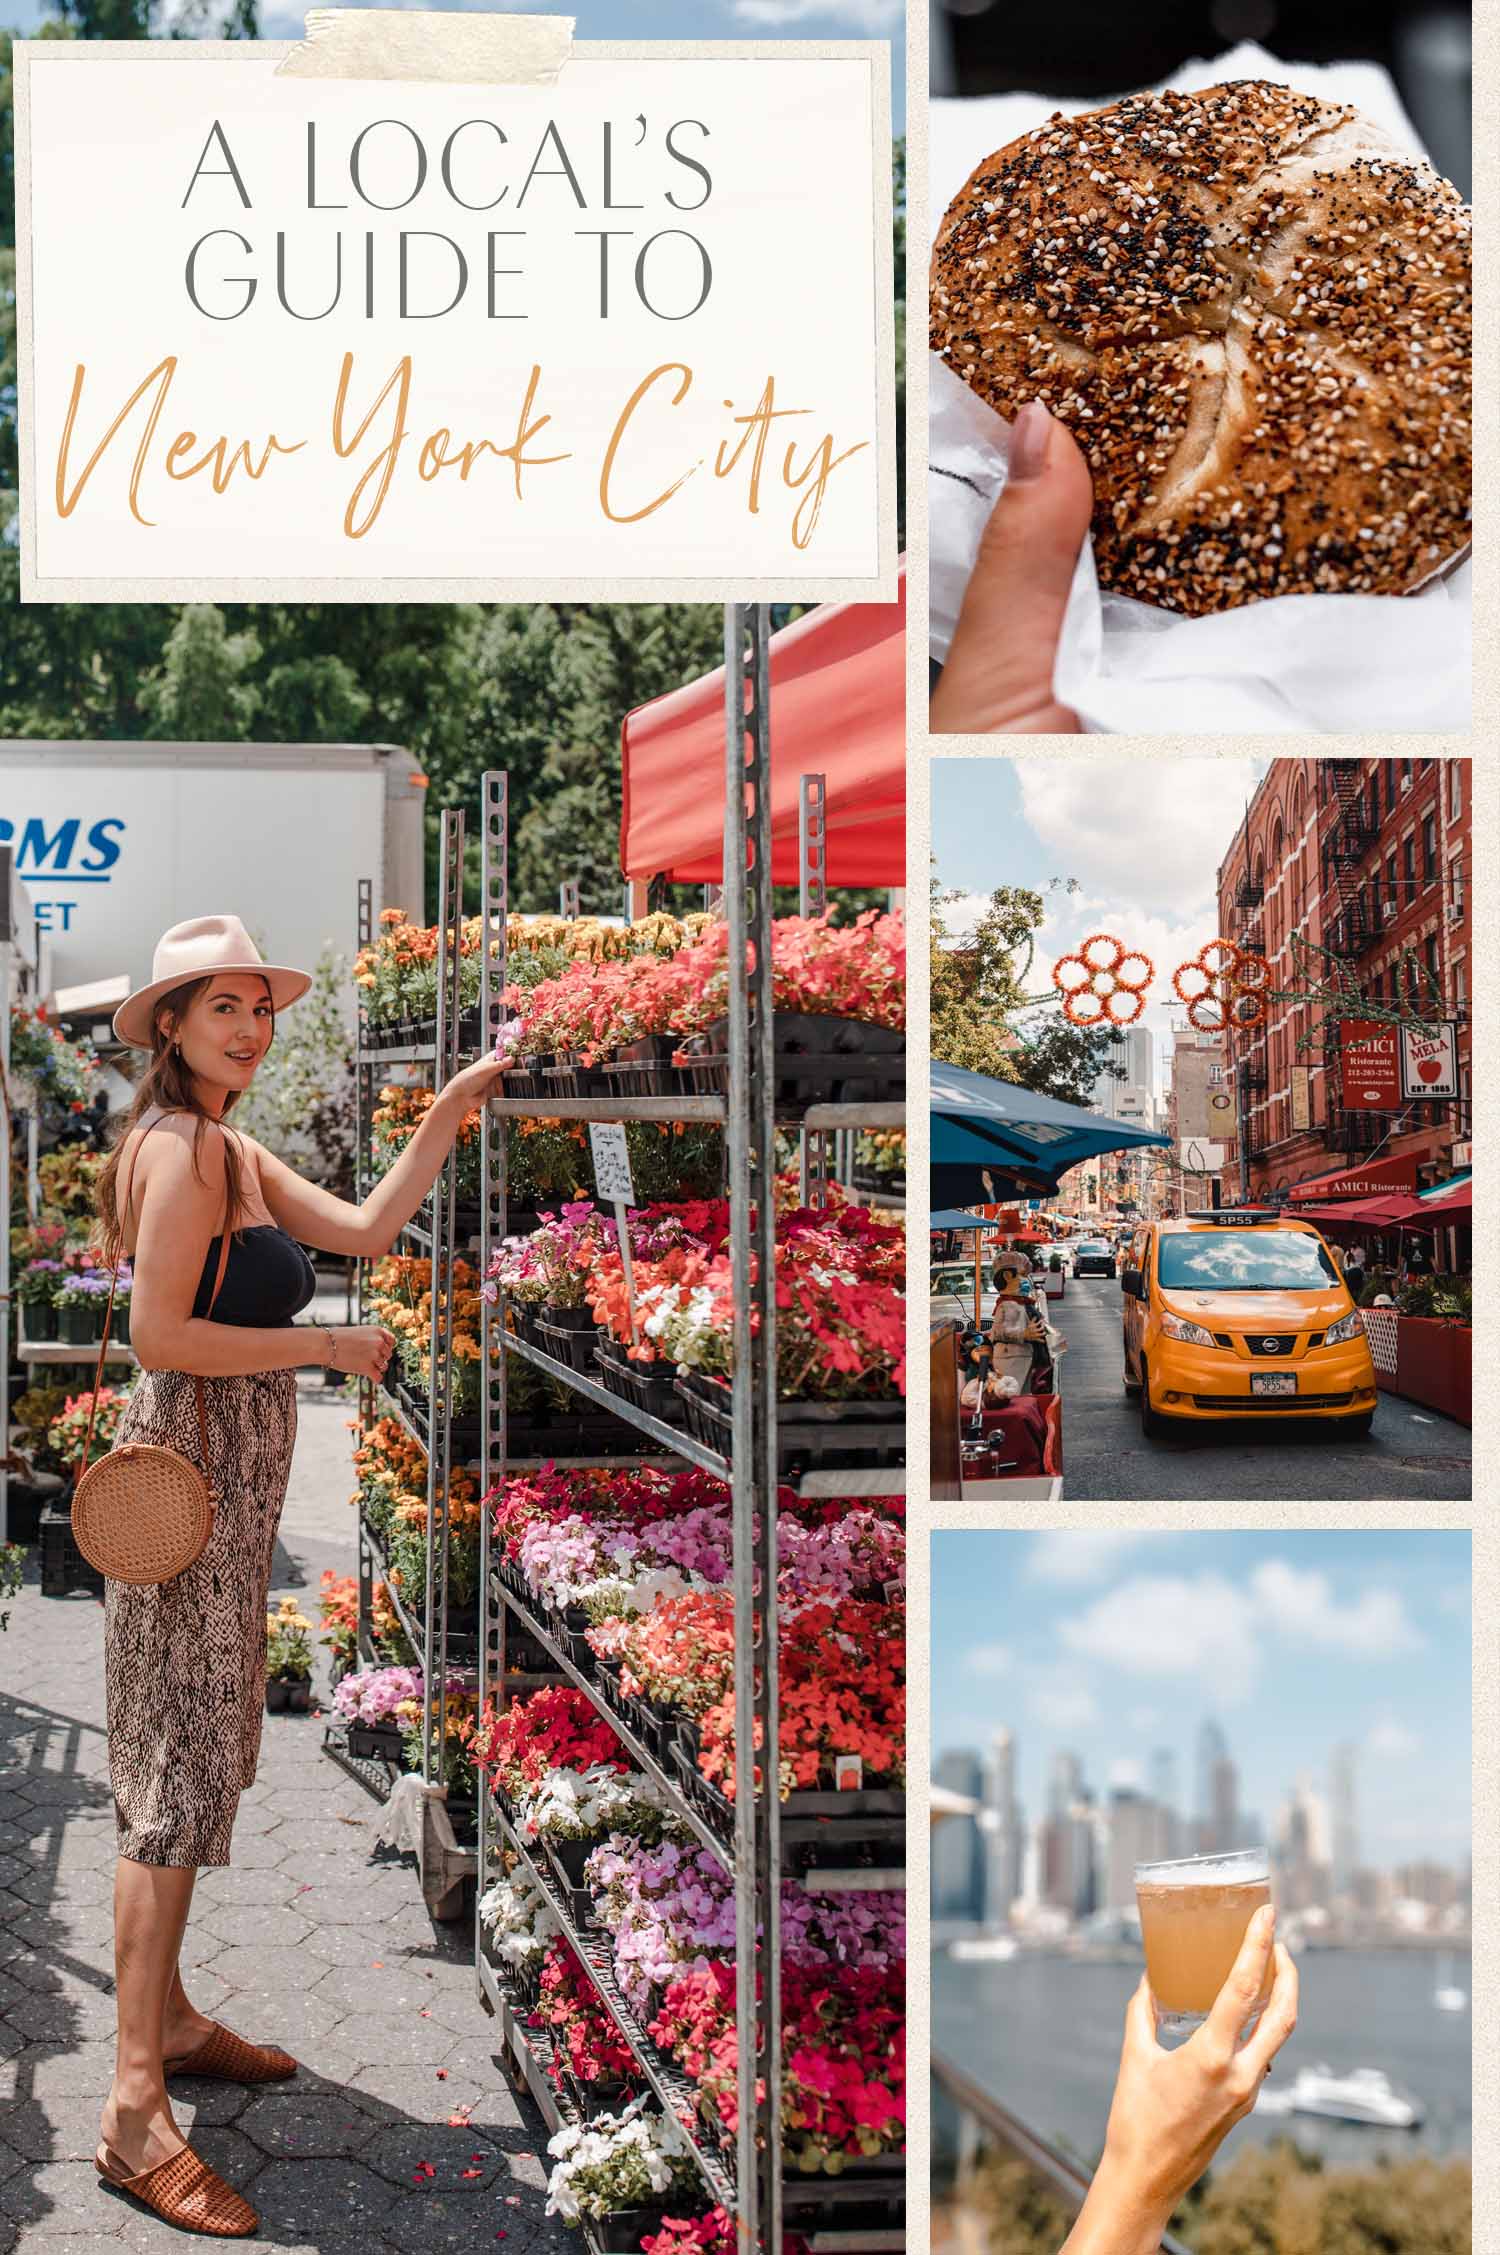 Locals Guide to New York City